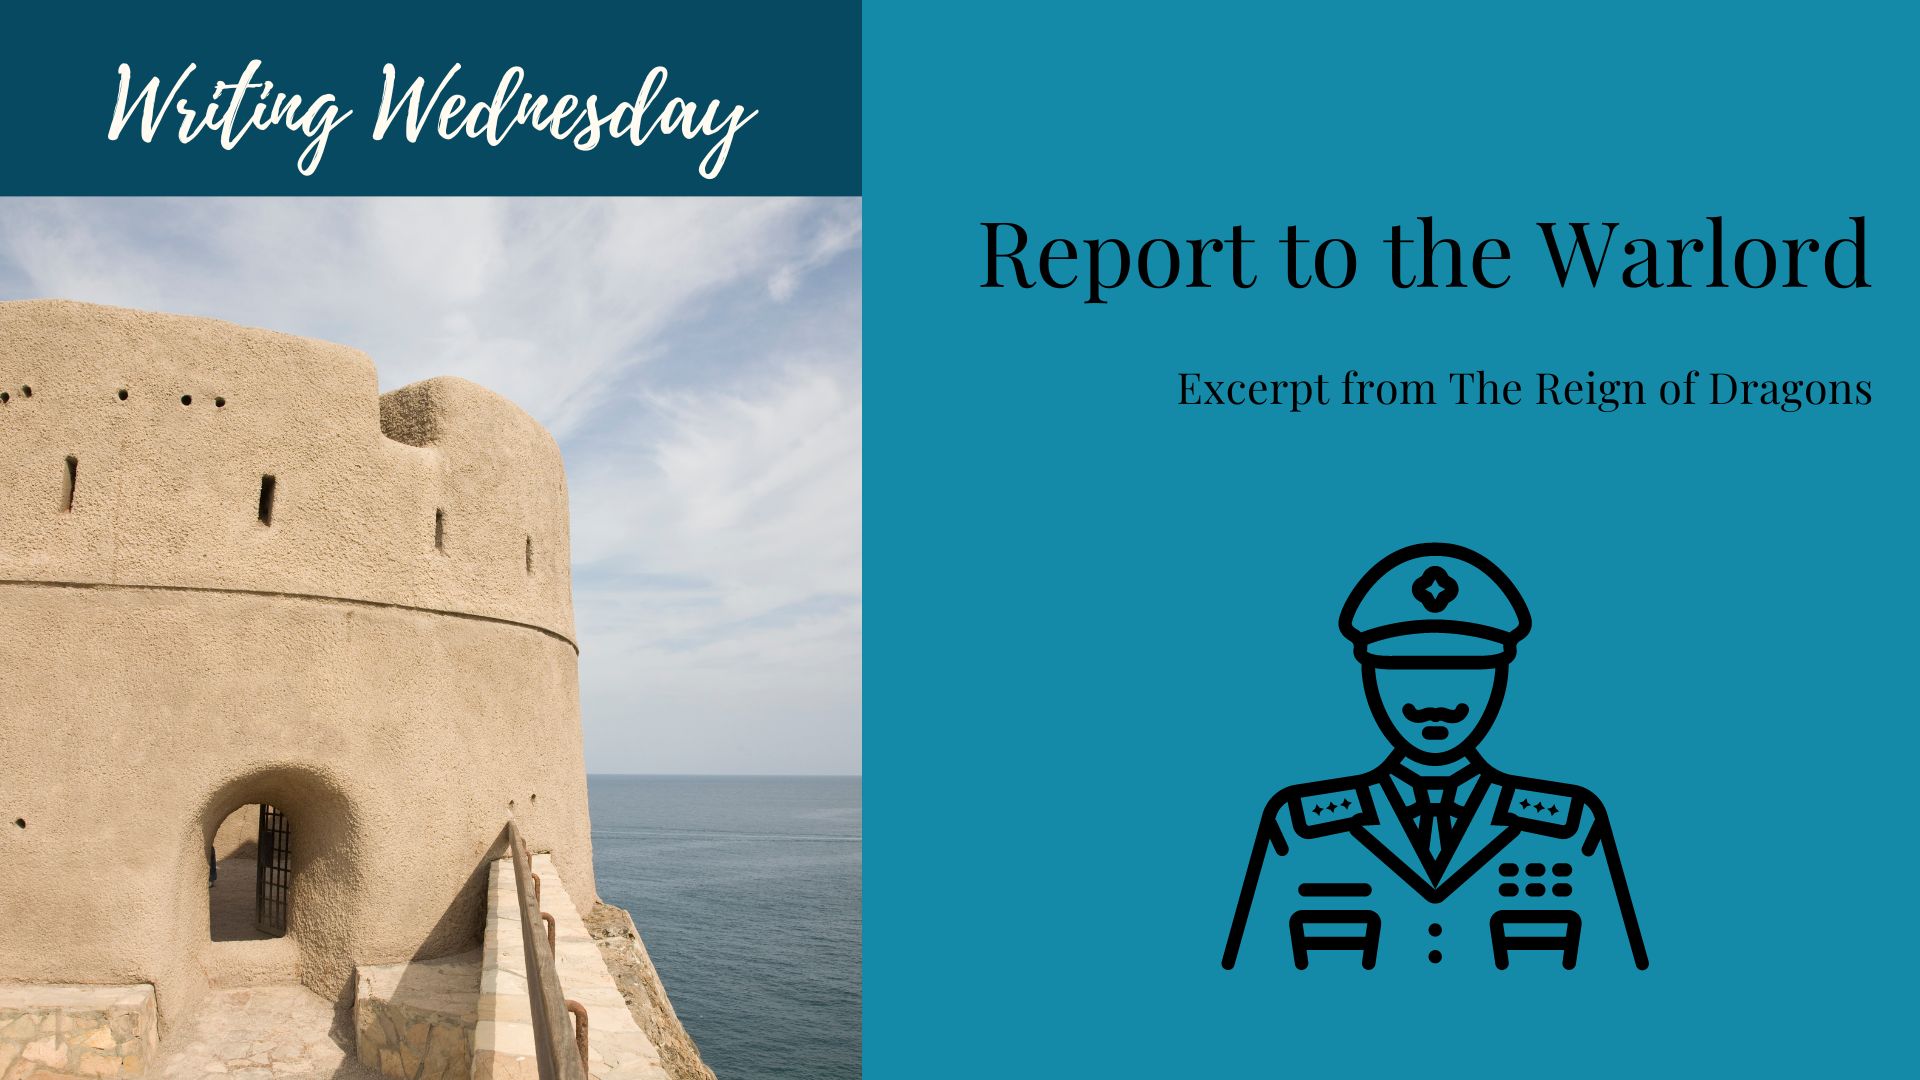 You are currently viewing Writing Wednesday: Report to the Warlord